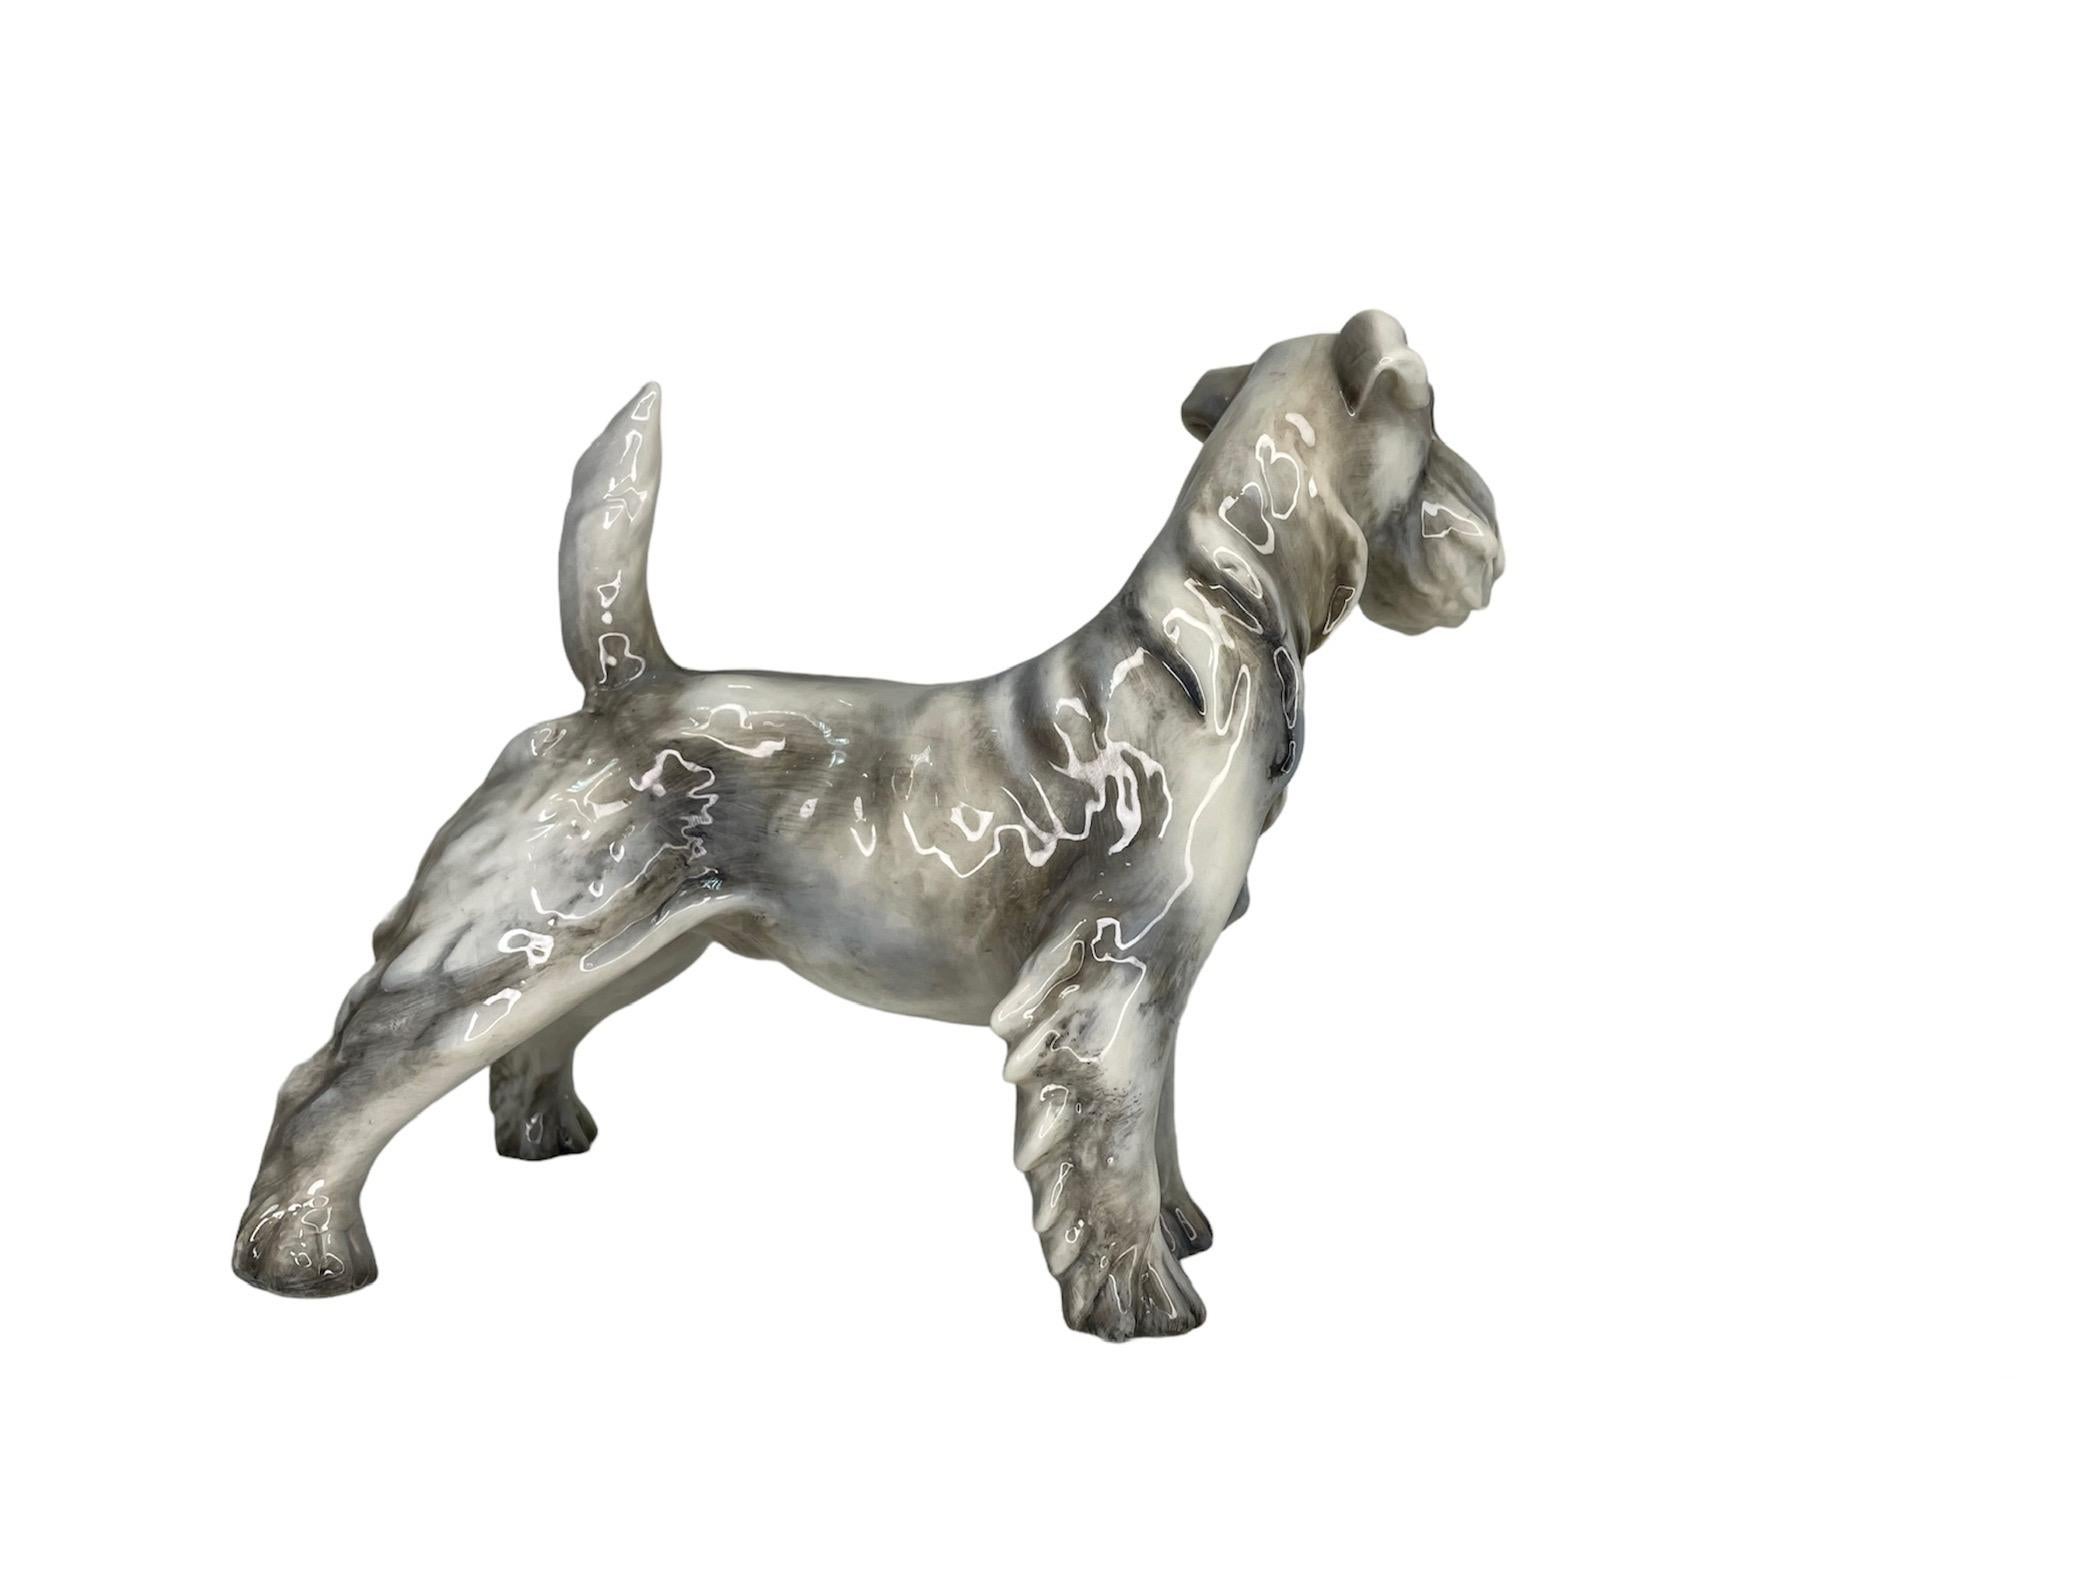 Molded Guido Cacciapuoti Porcelain Figurine Of A Wire Fox Terrier Dog For Sale